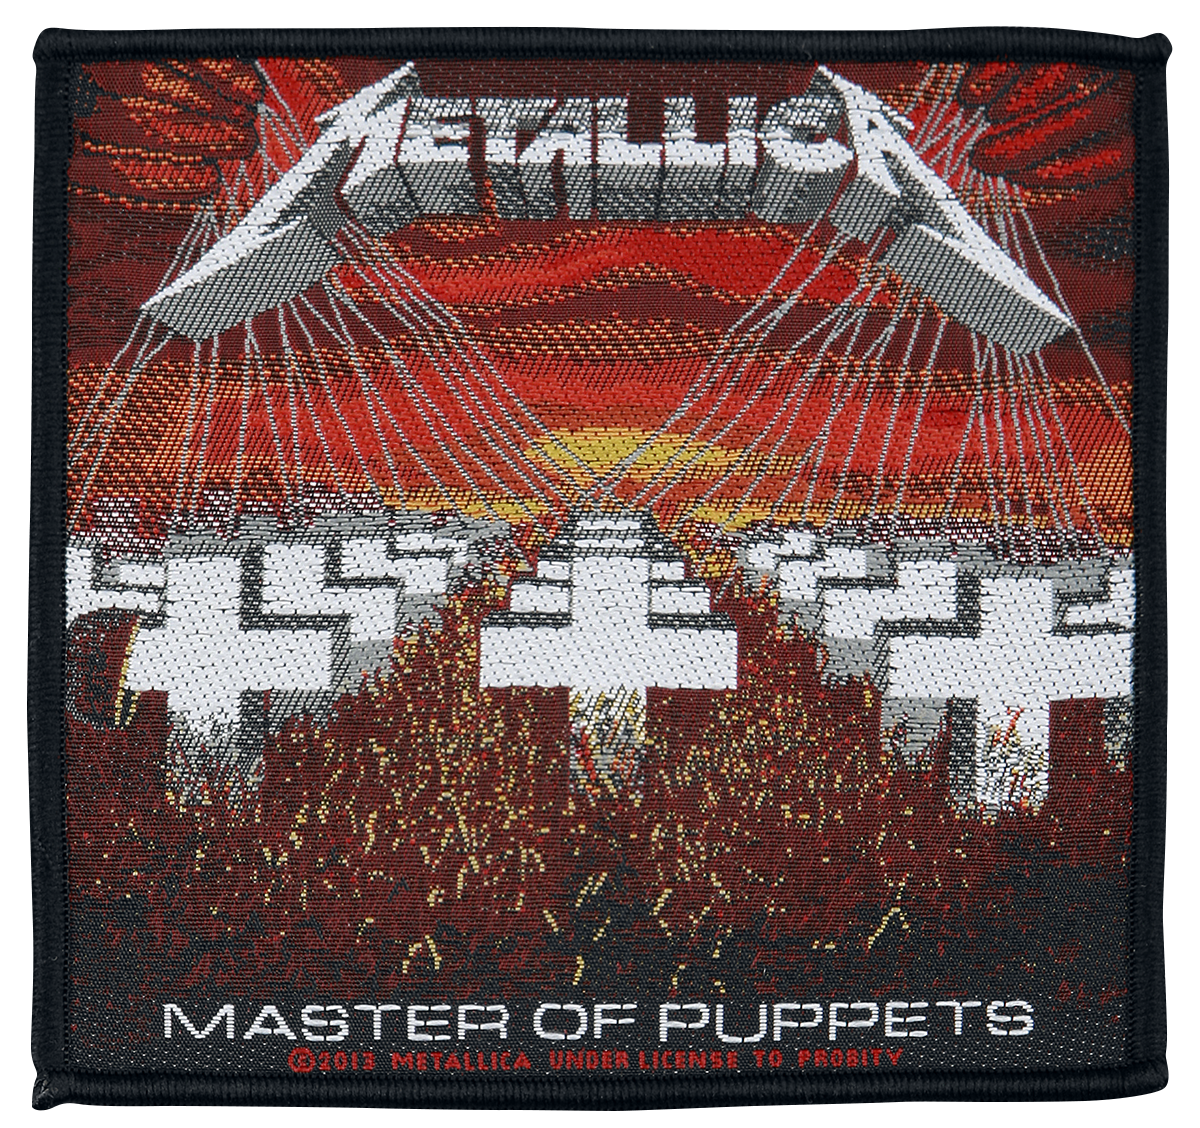 Metallica - Master Of Puppets - Patch - multicolor